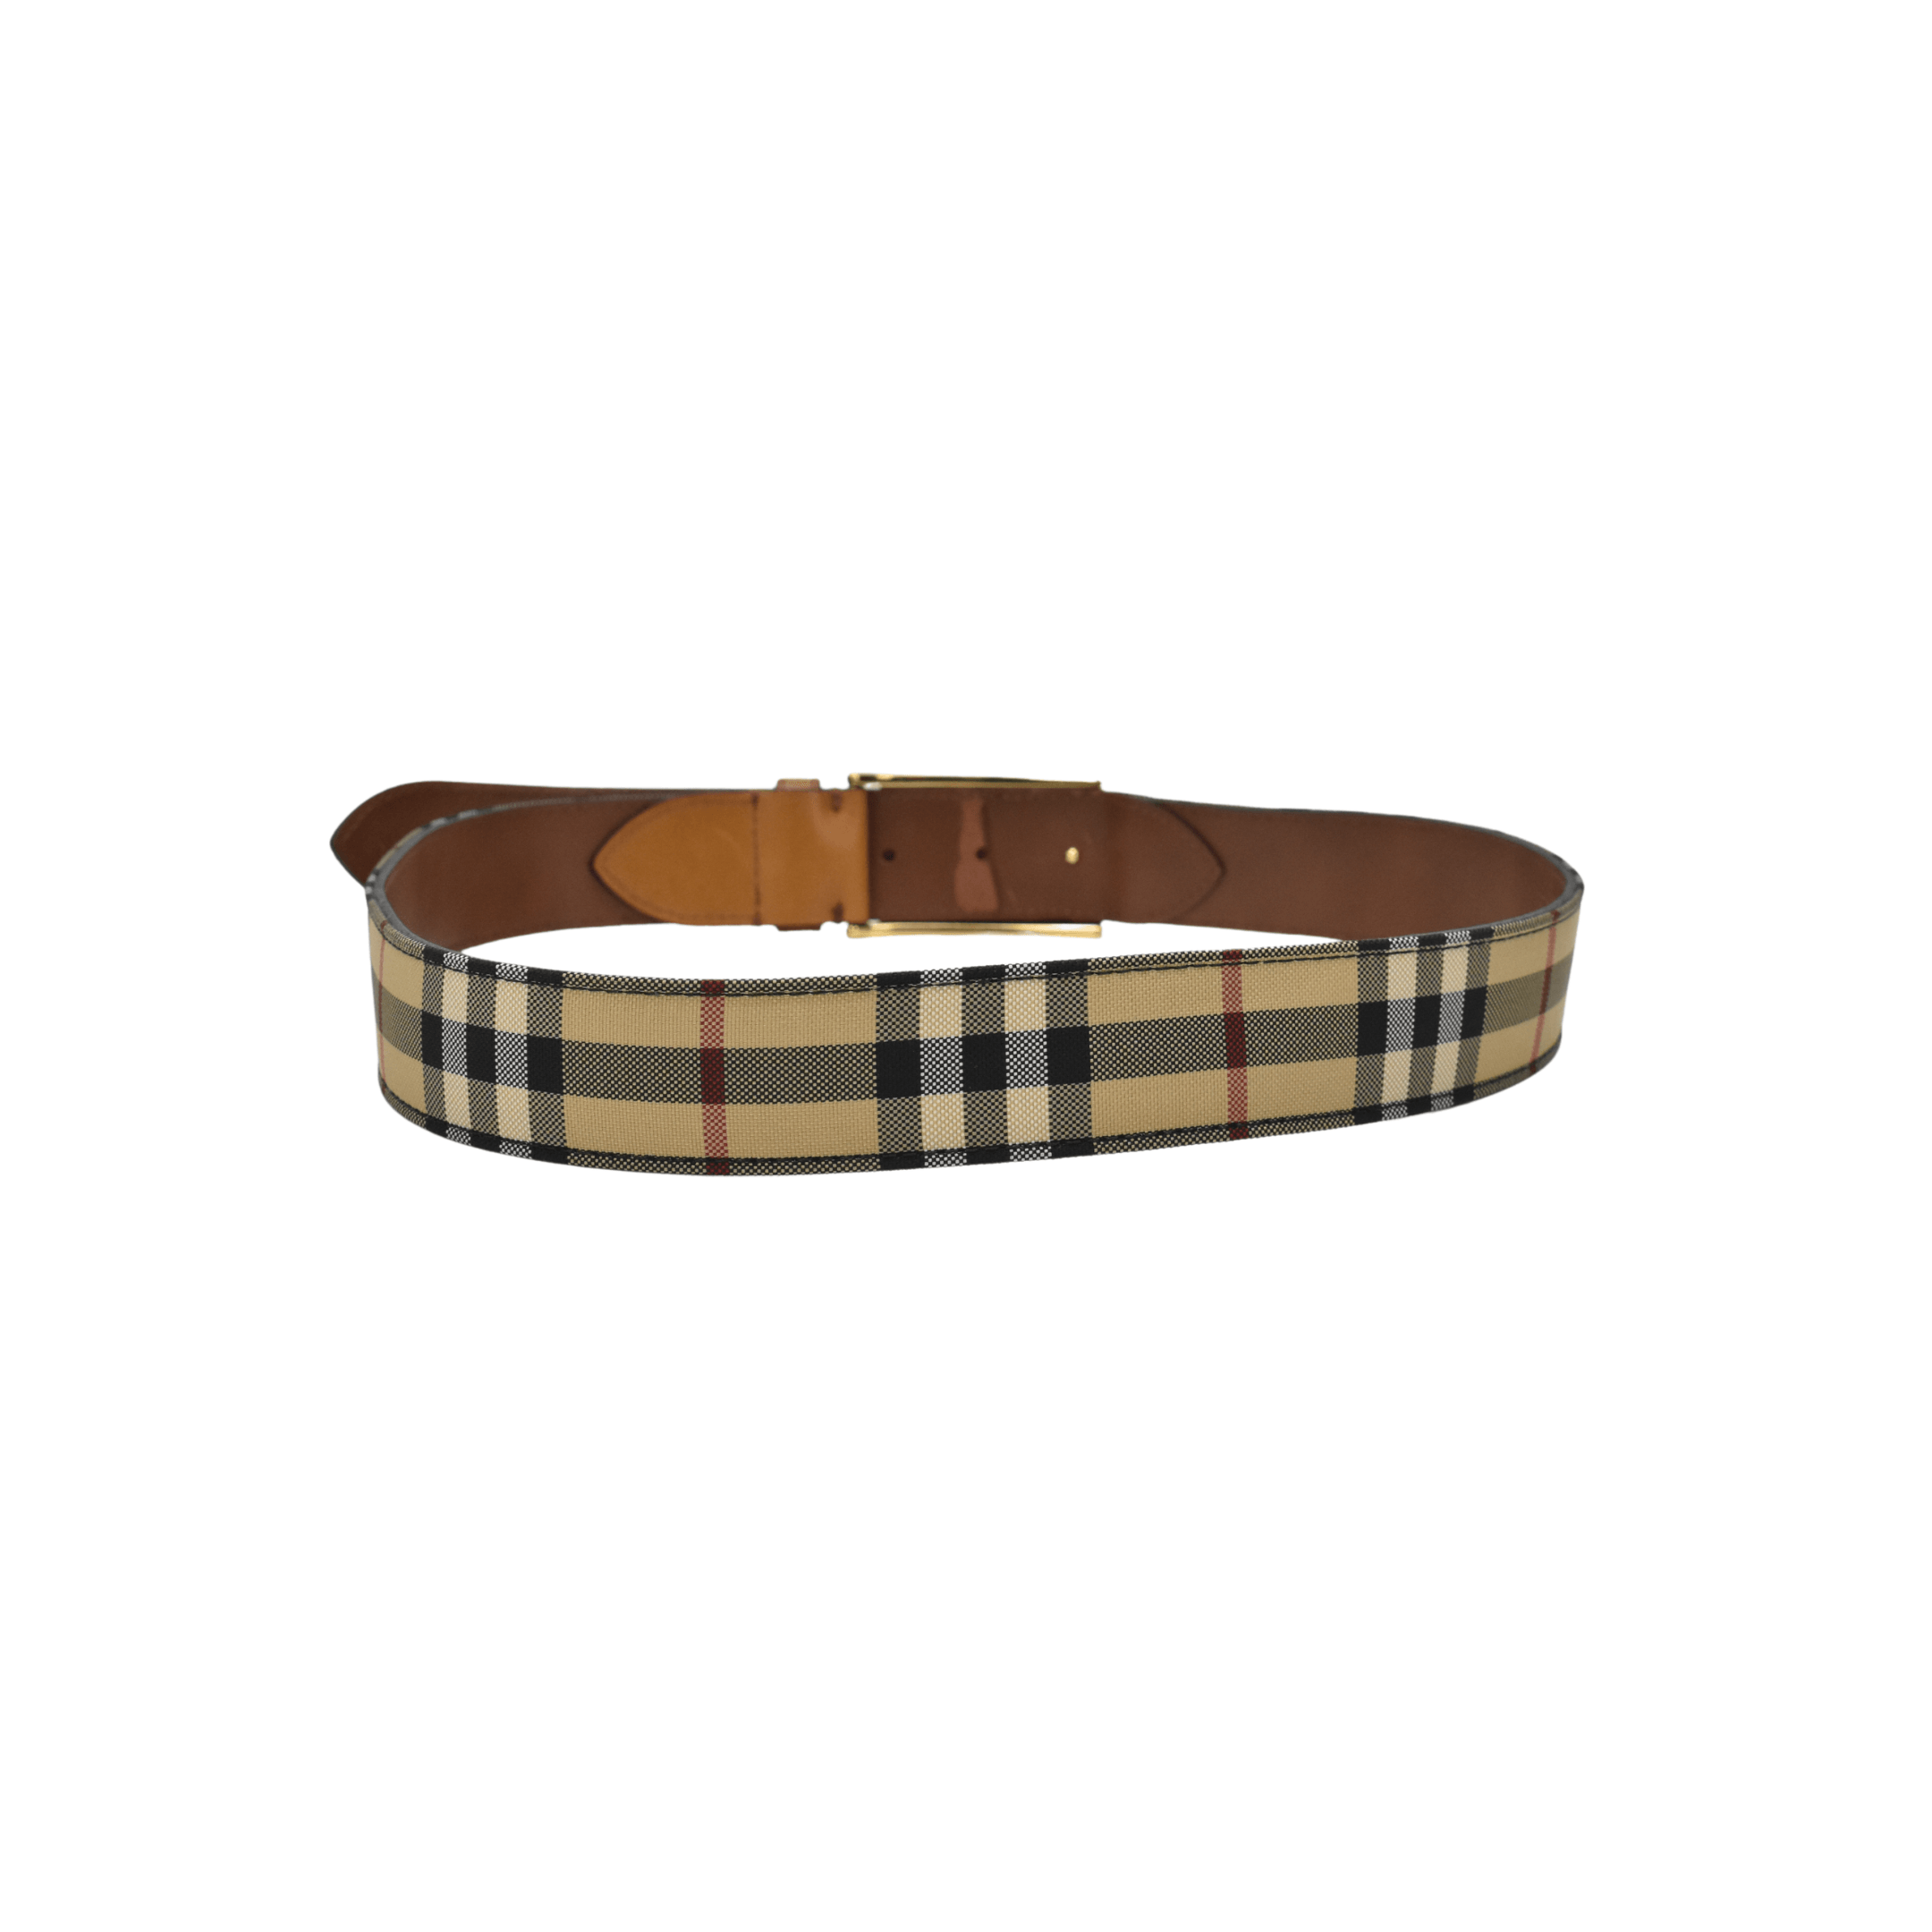 Burberry Belt - Women's 34/85 - Fashionably Yours